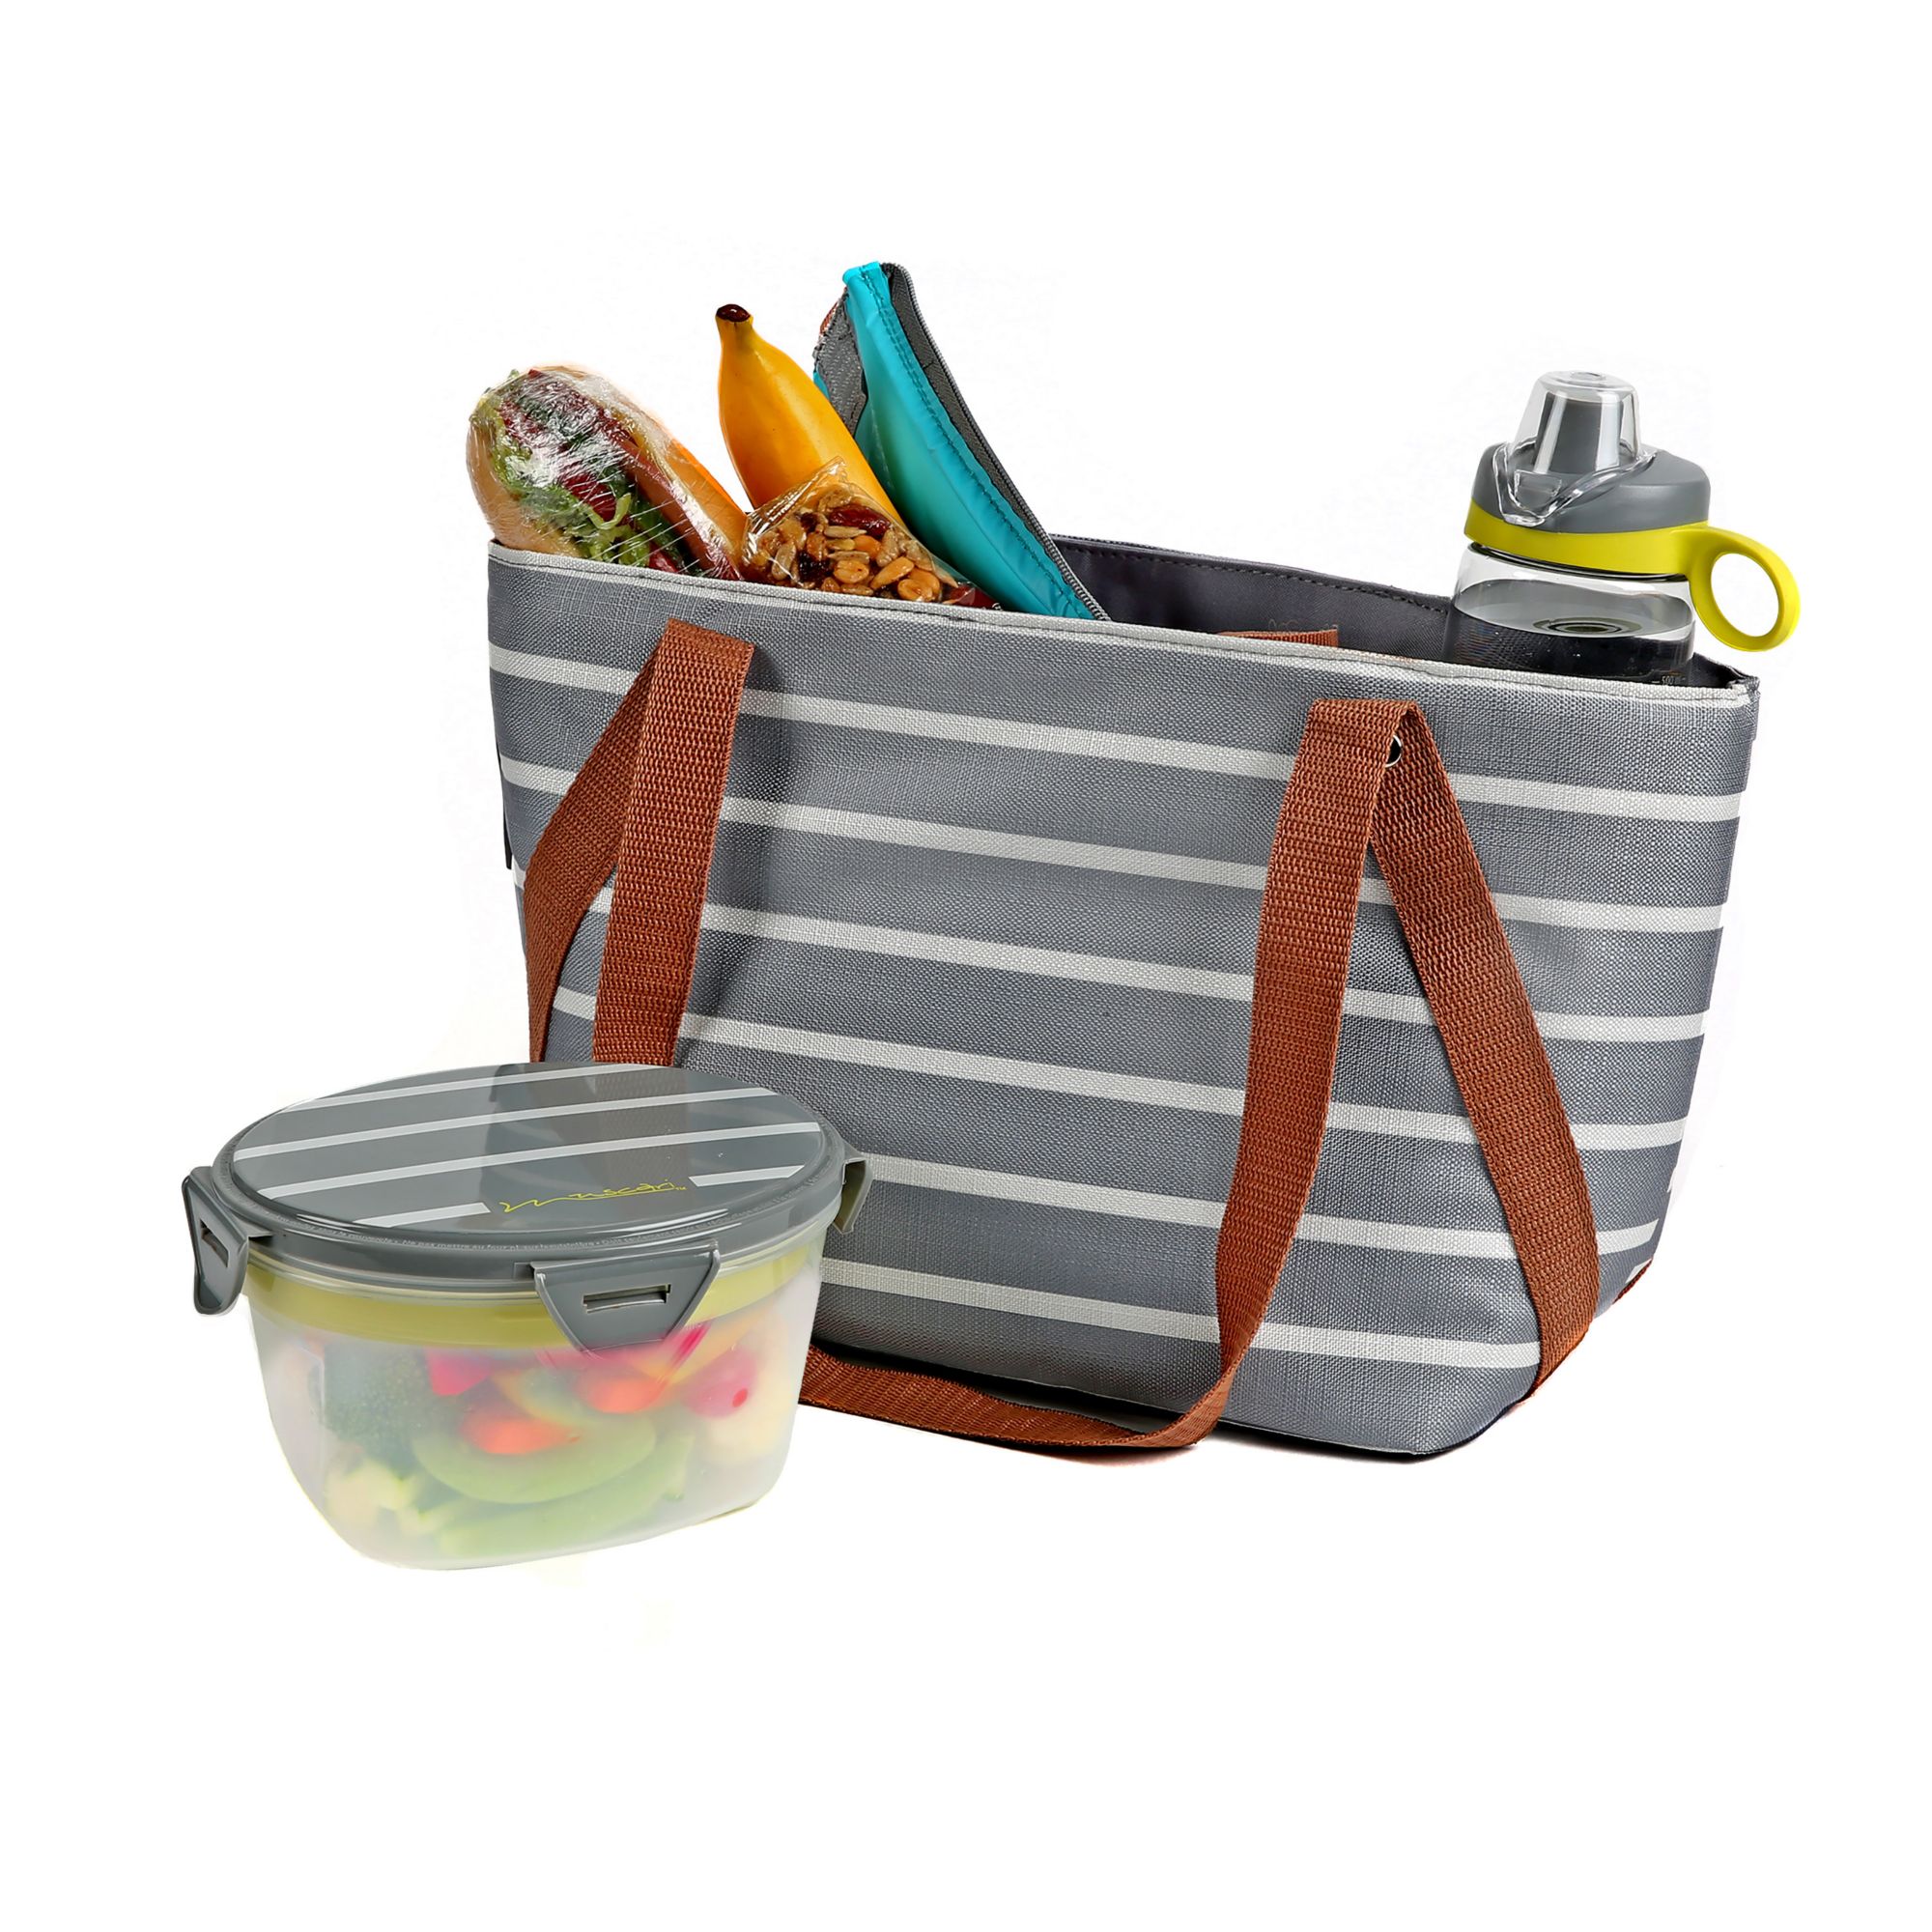 Jacki Design Concept Insulated Lunch Bag, 2 Deck Lunch Box Container 1 –  JKD Corporation Import and Export, Lda. NIPC: 516546457.